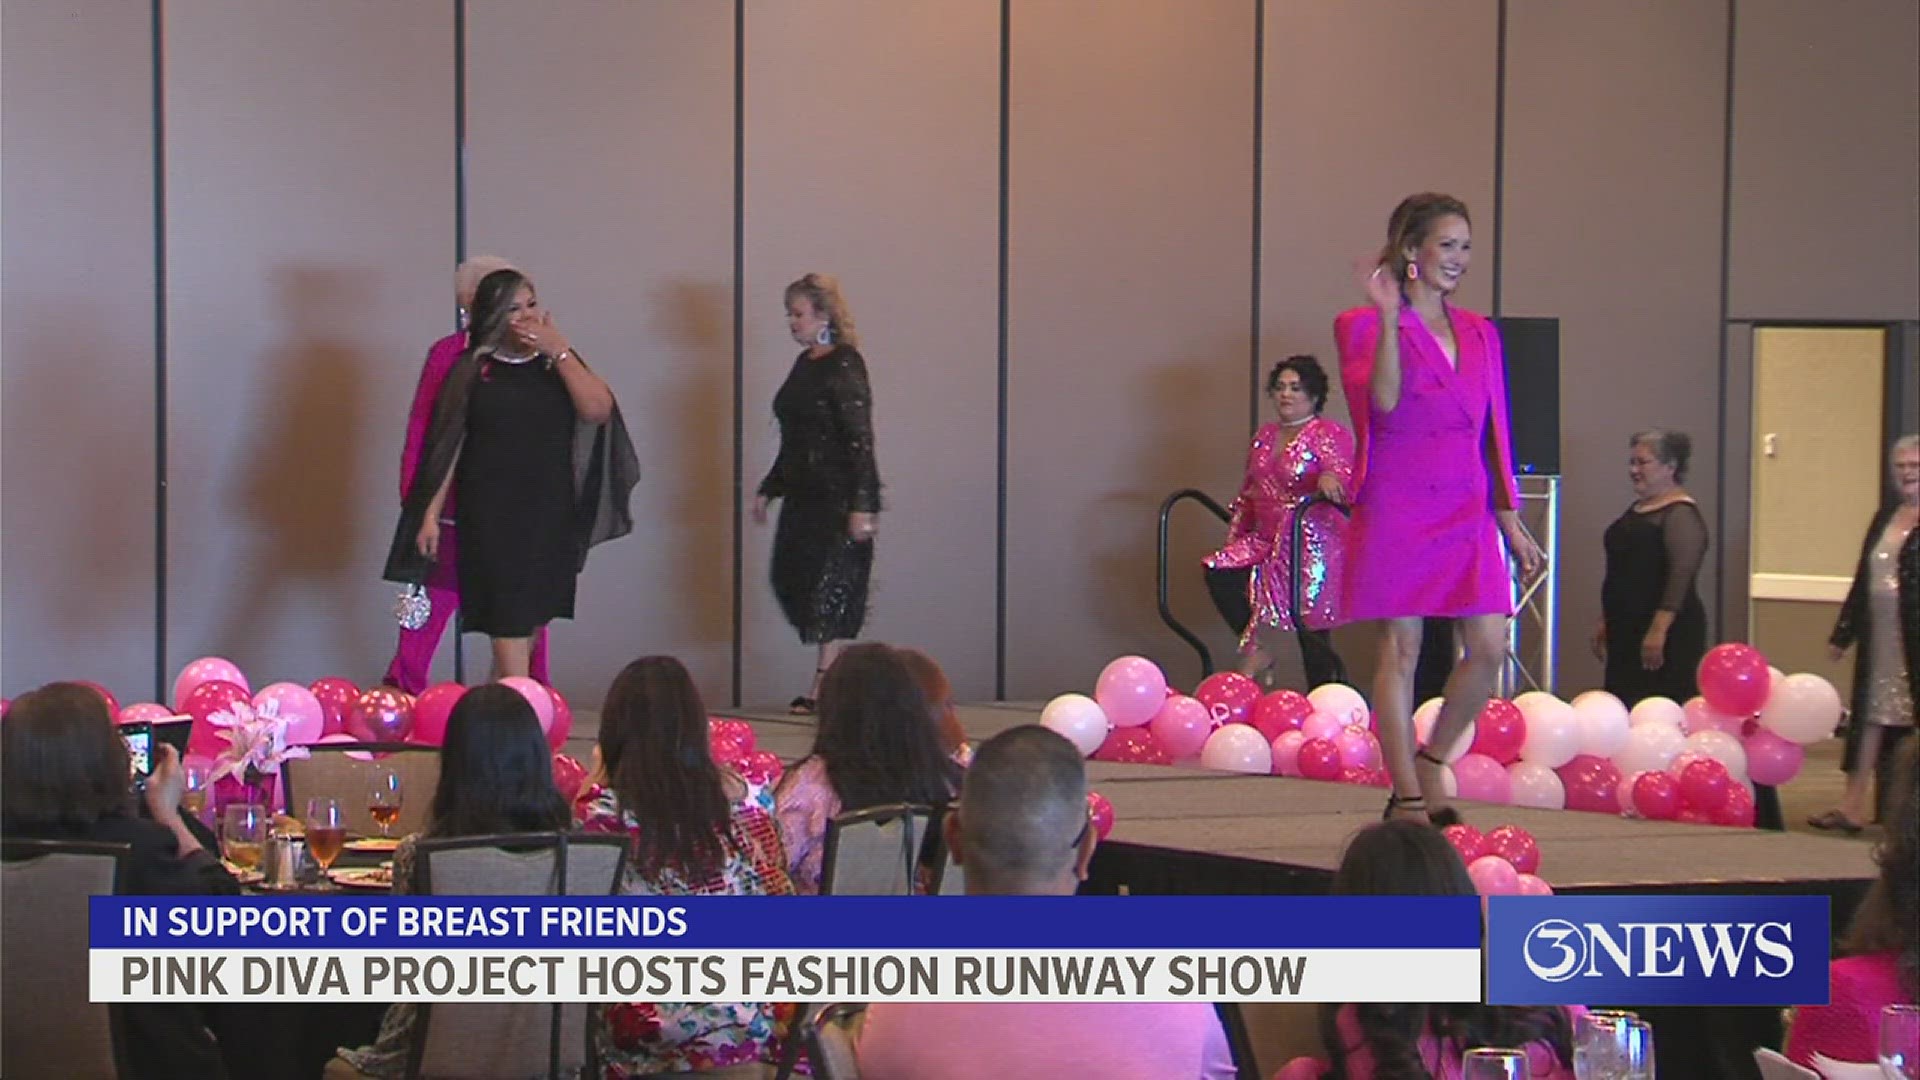 DISARRAY - Penthouse Lingerie Fashion Show Benefits Breast Cancer Research